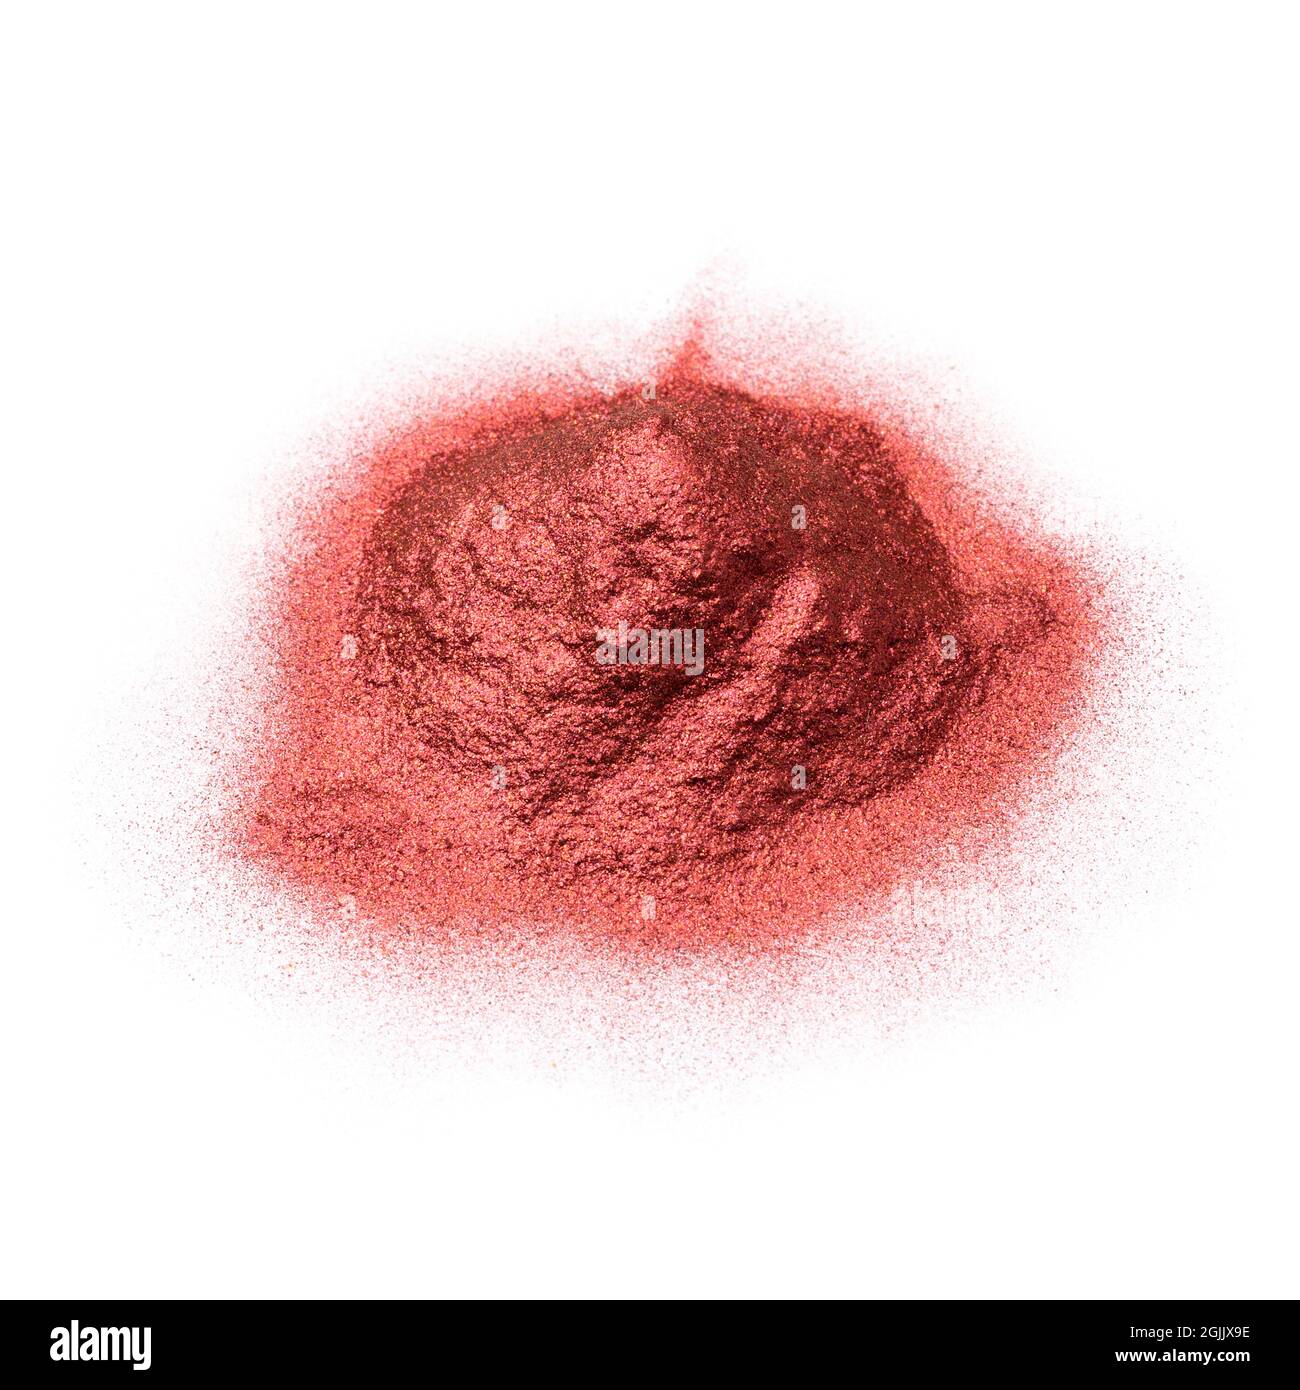 Heap of red powder pigment isolated on white background Stock Photo